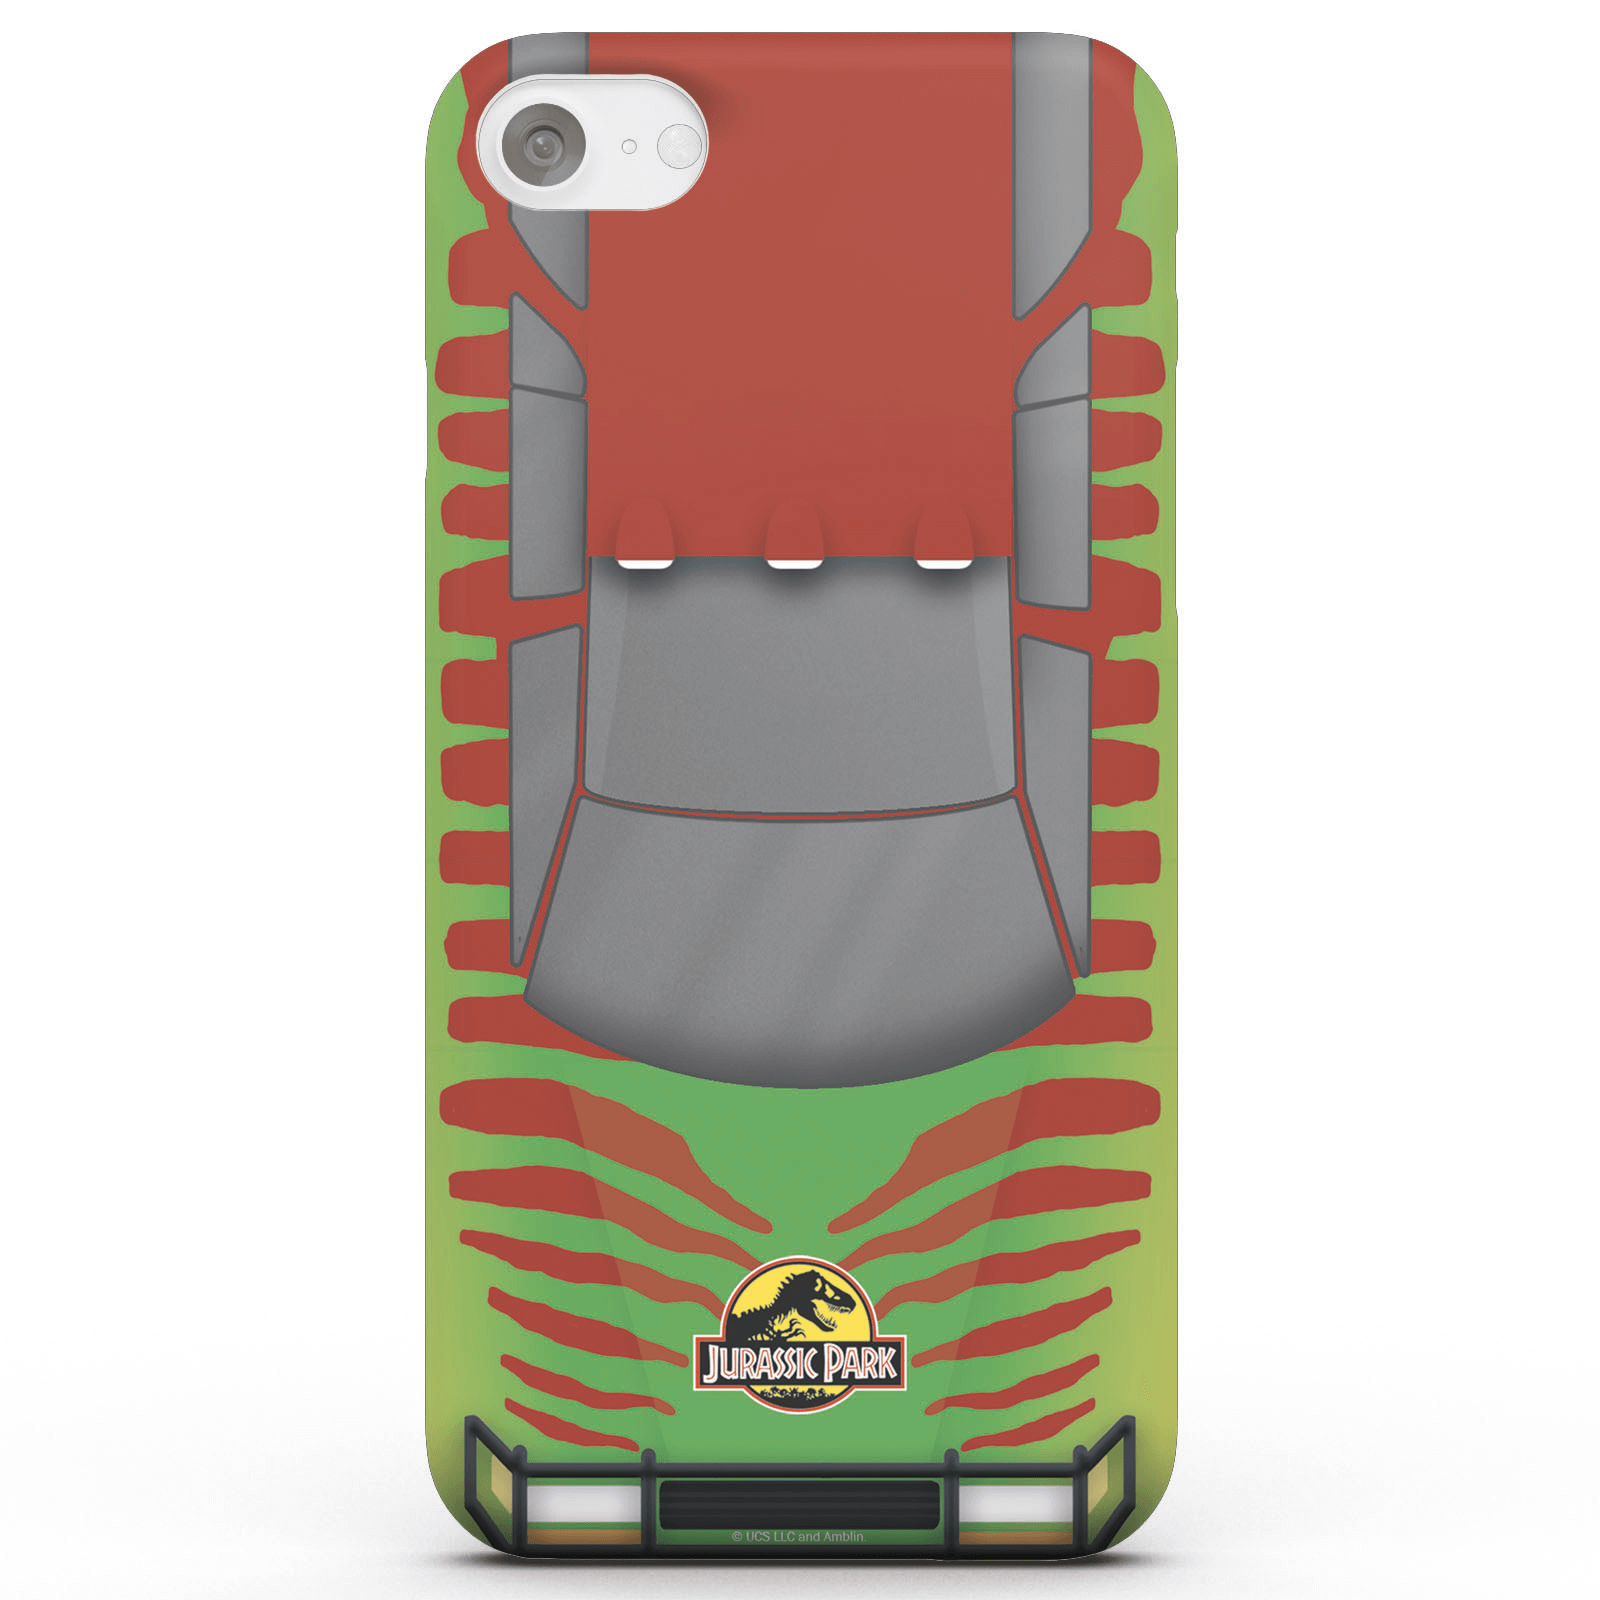 Photos - Case Jurassic Park Tour Car Phone  for iPhone and Android - iPhone 5/5s - S